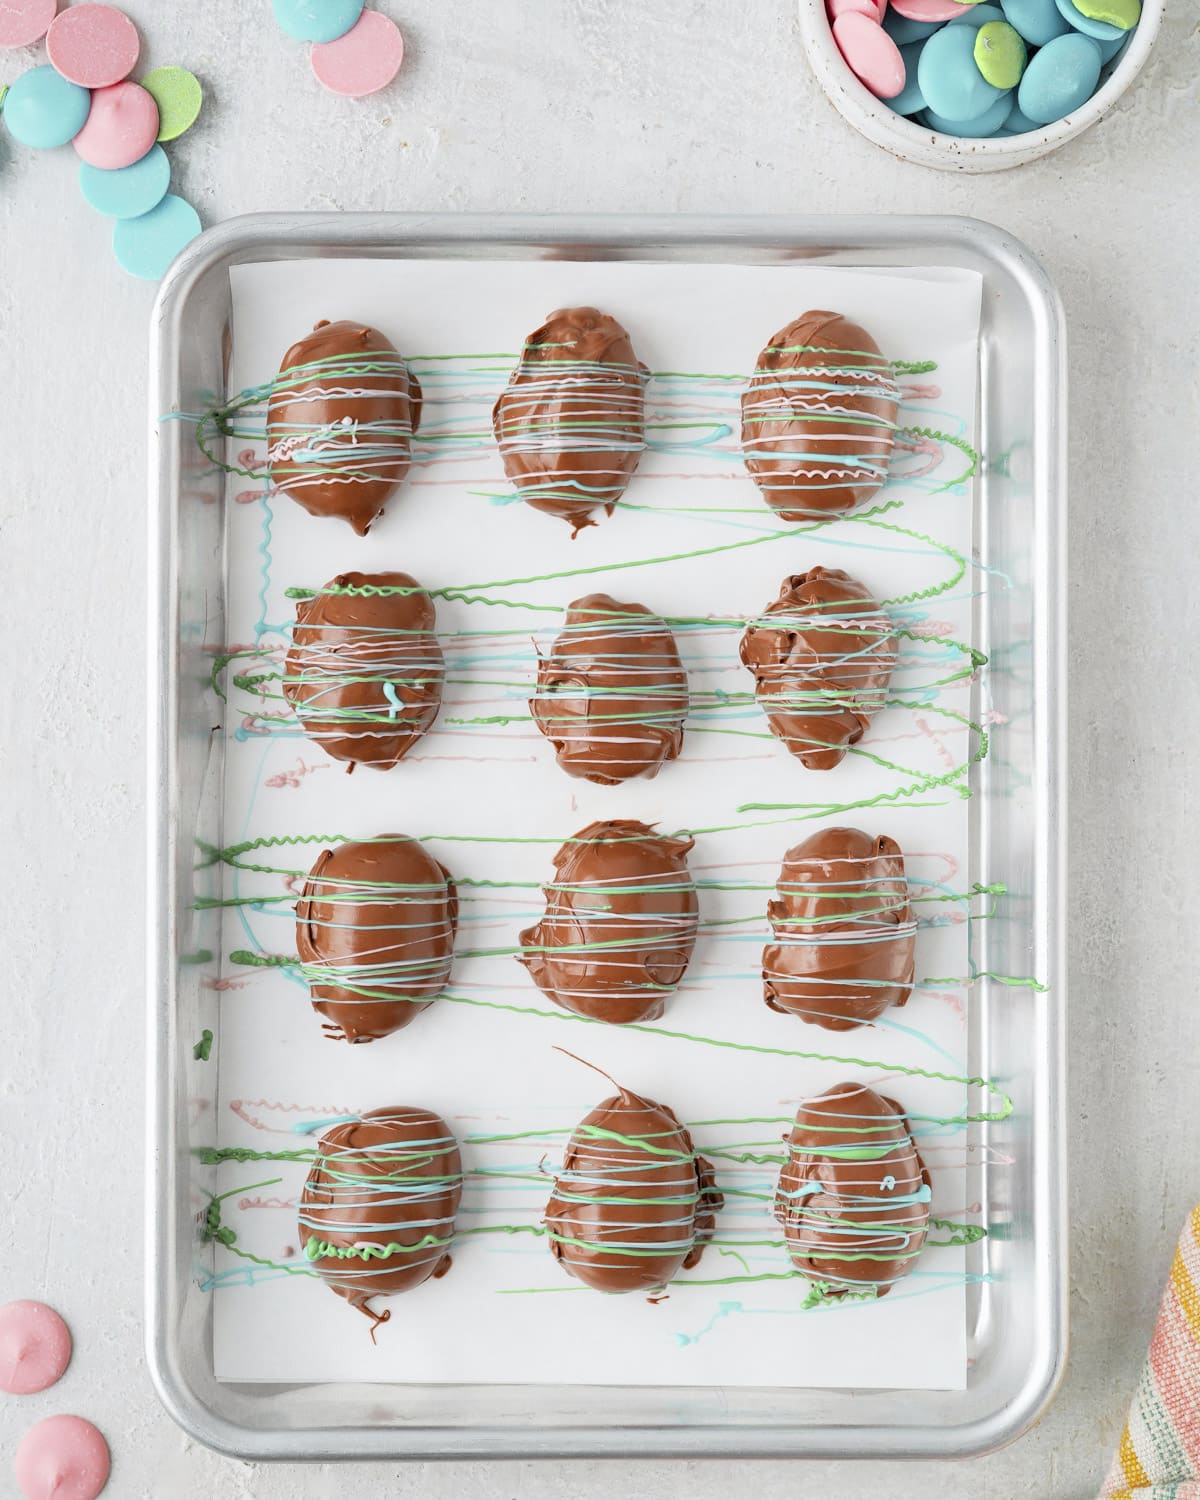 Chocolate eggs drizzled with candy melts